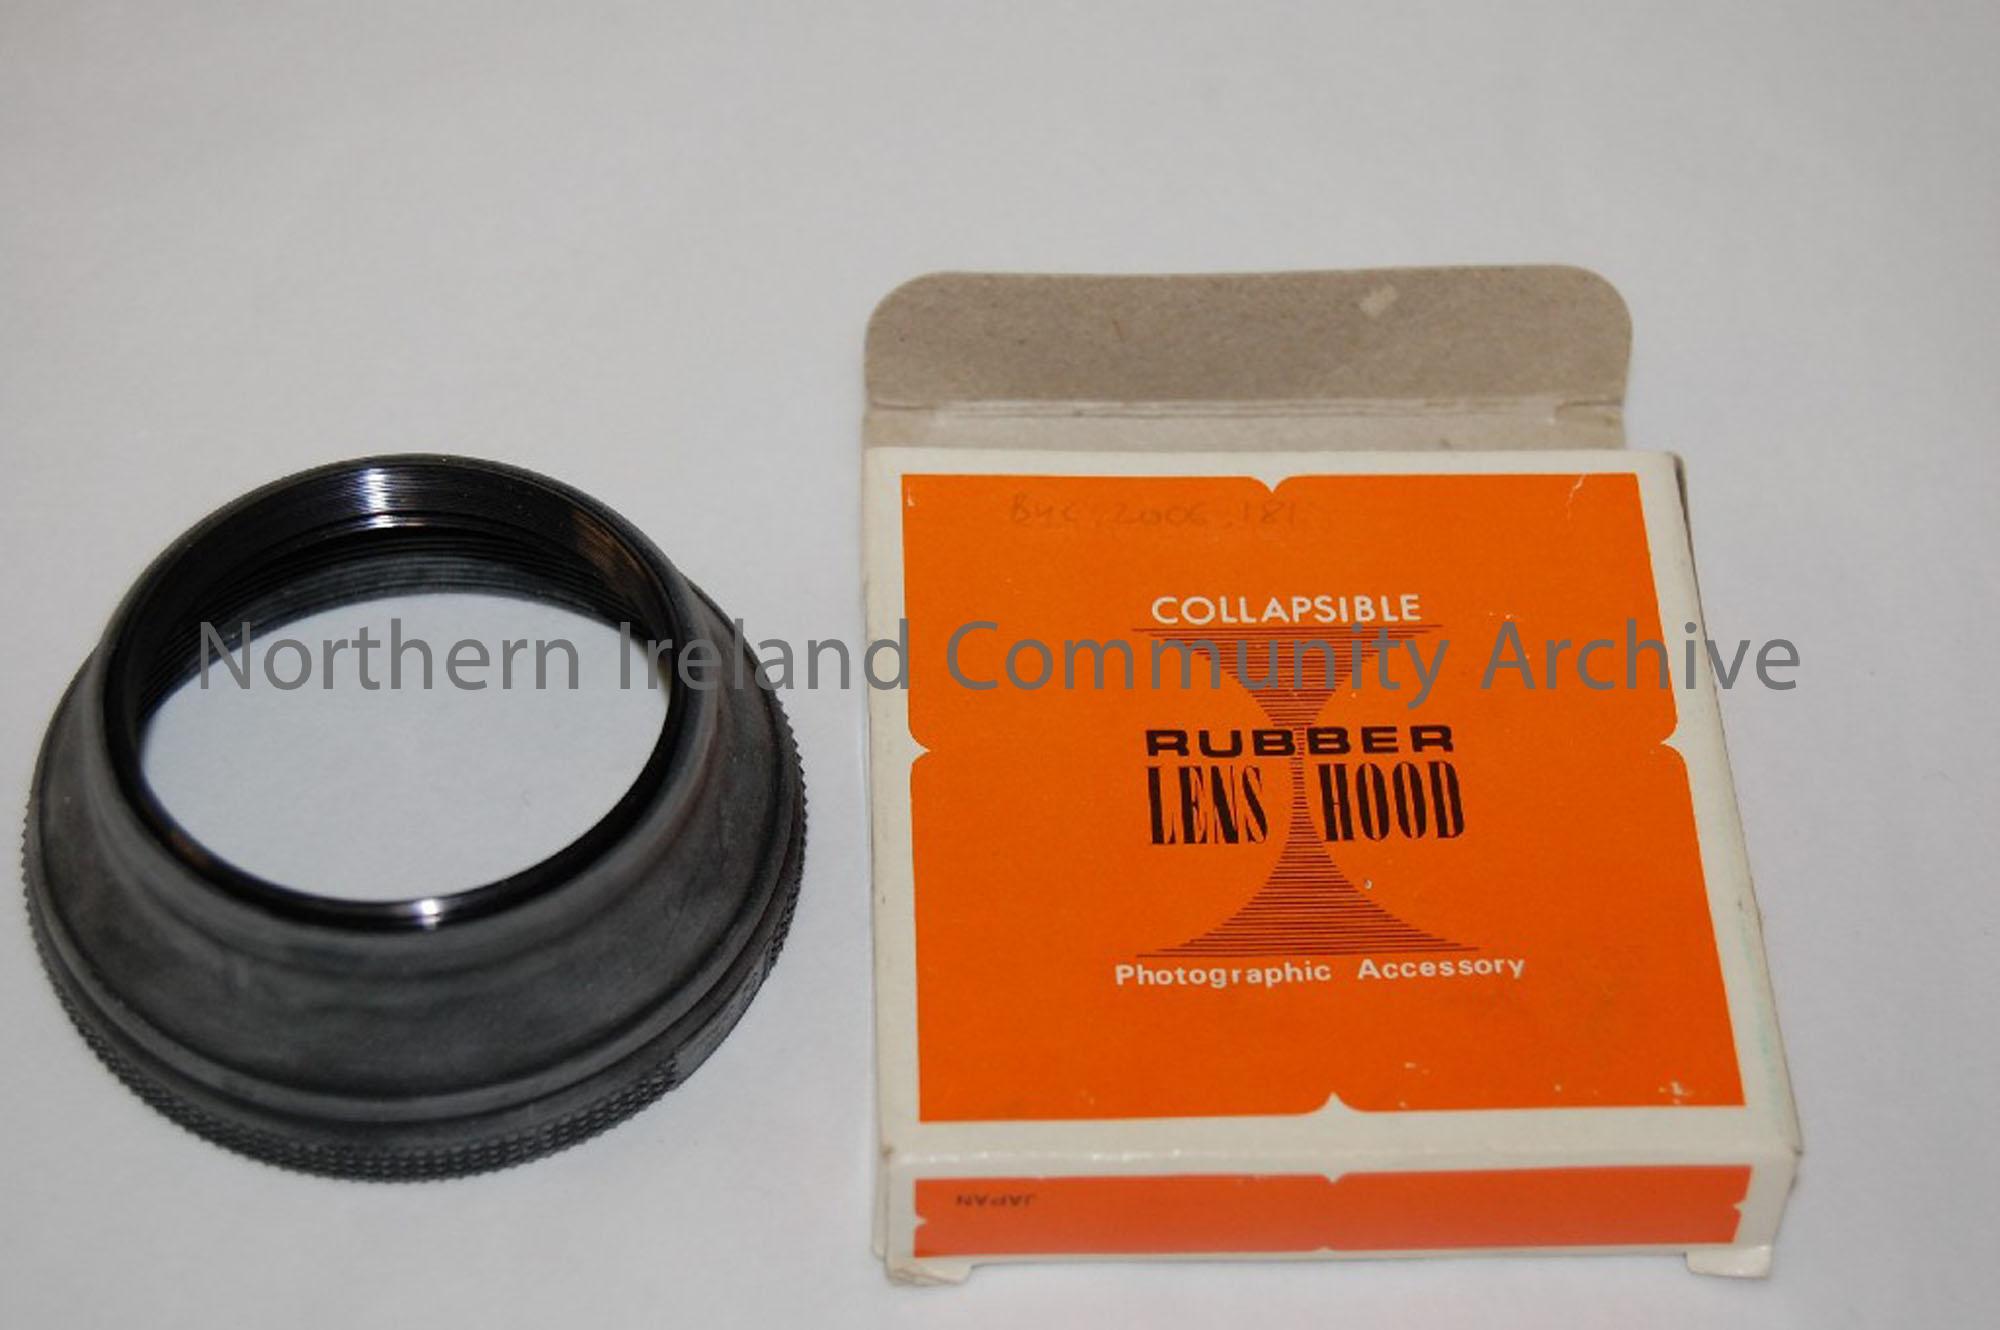 Collapsible rubber Lens hood for cine camera in orange box